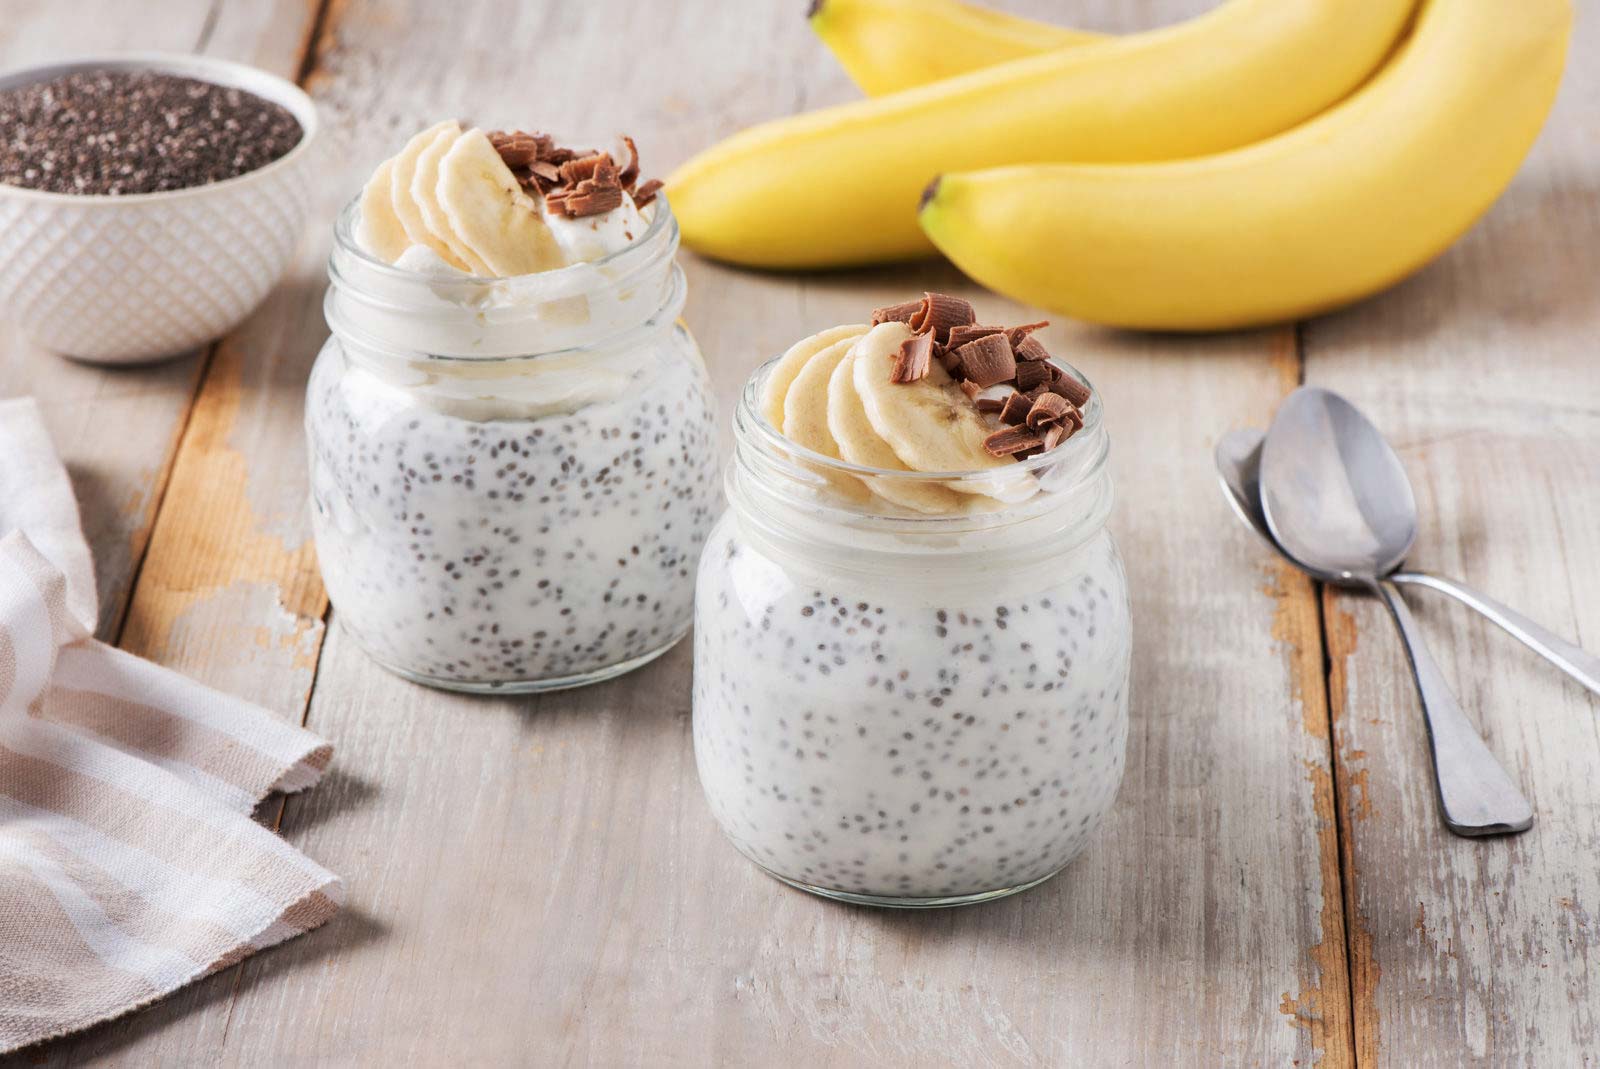 Only a Truly Cool Person Will Have Eaten at Least 13/25 of These Foods Chia pudding